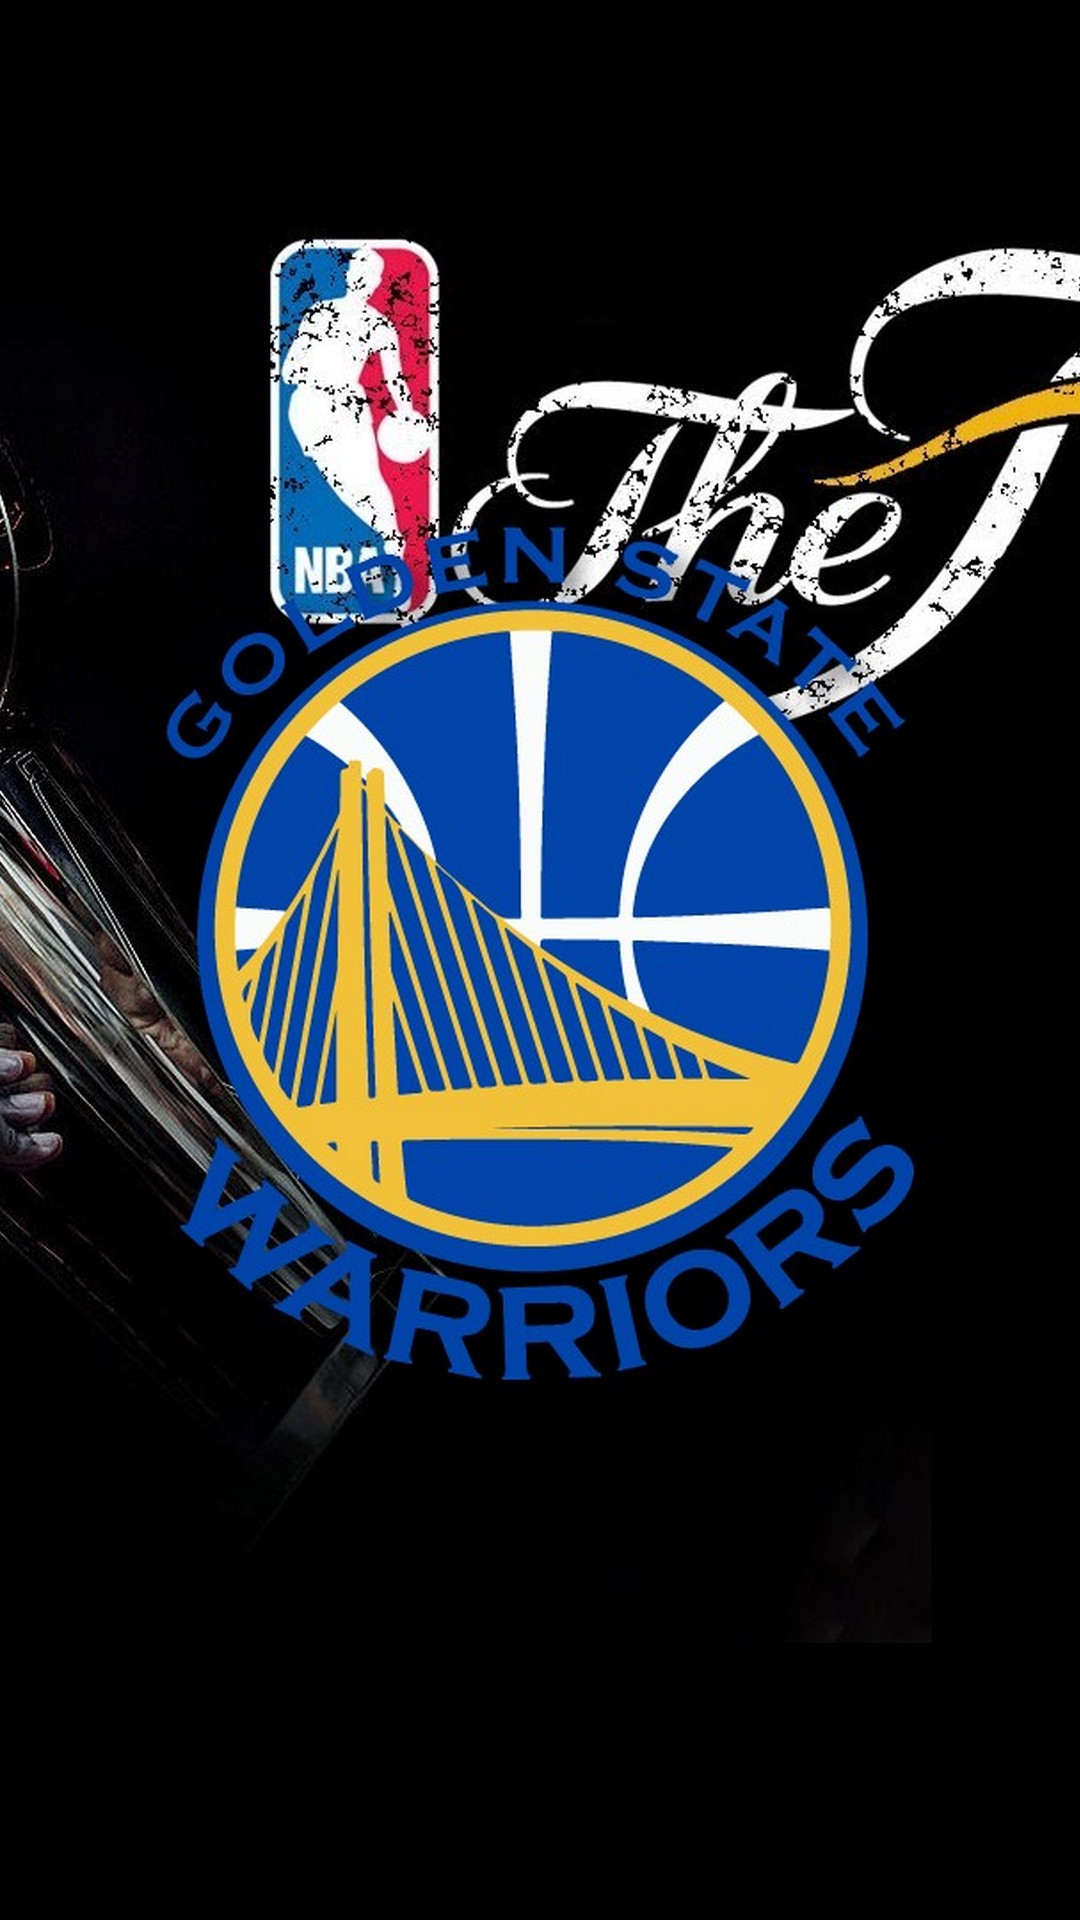 Golden State Warriors HD Wallpapers For Mobile with image resolution 1080x1920 pixel. You can make this wallpaper for your Desktop Computer Backgrounds, Mac Wallpapers, Android Lock screen or iPhone Screensavers